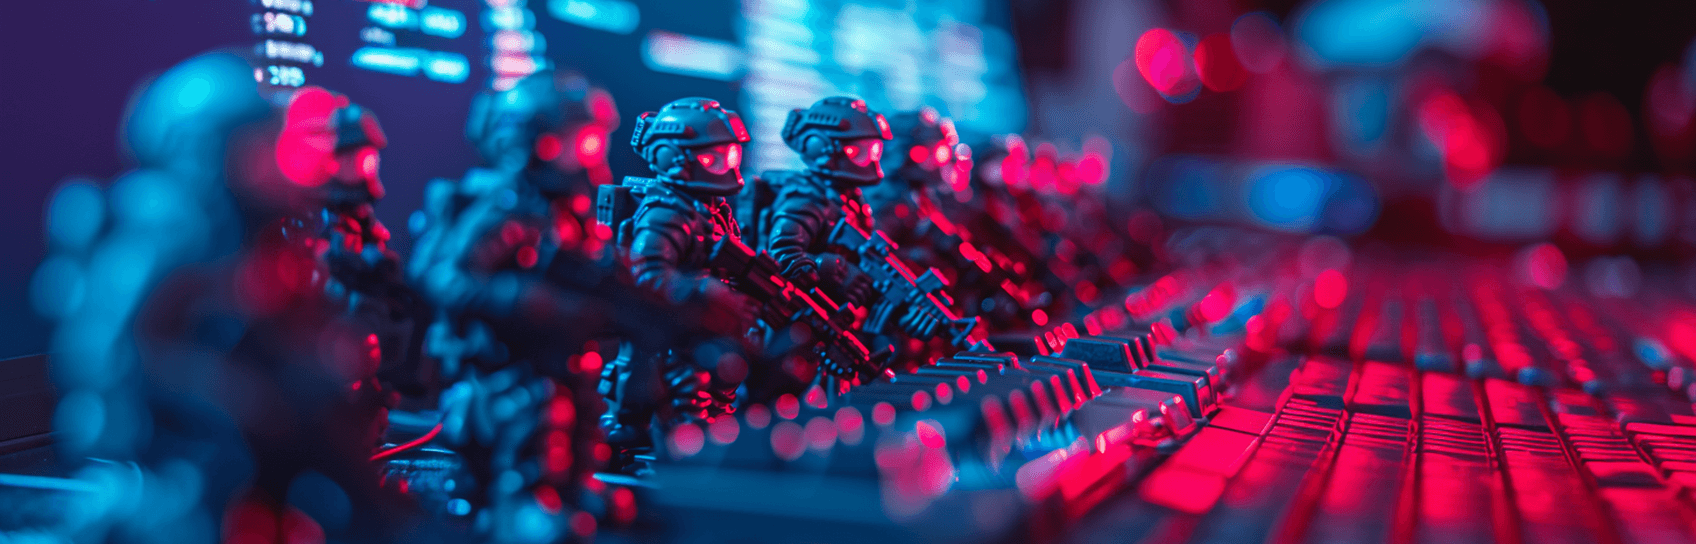 Army of cyber soldiers stood behind a keyboard with a website code visible in the background